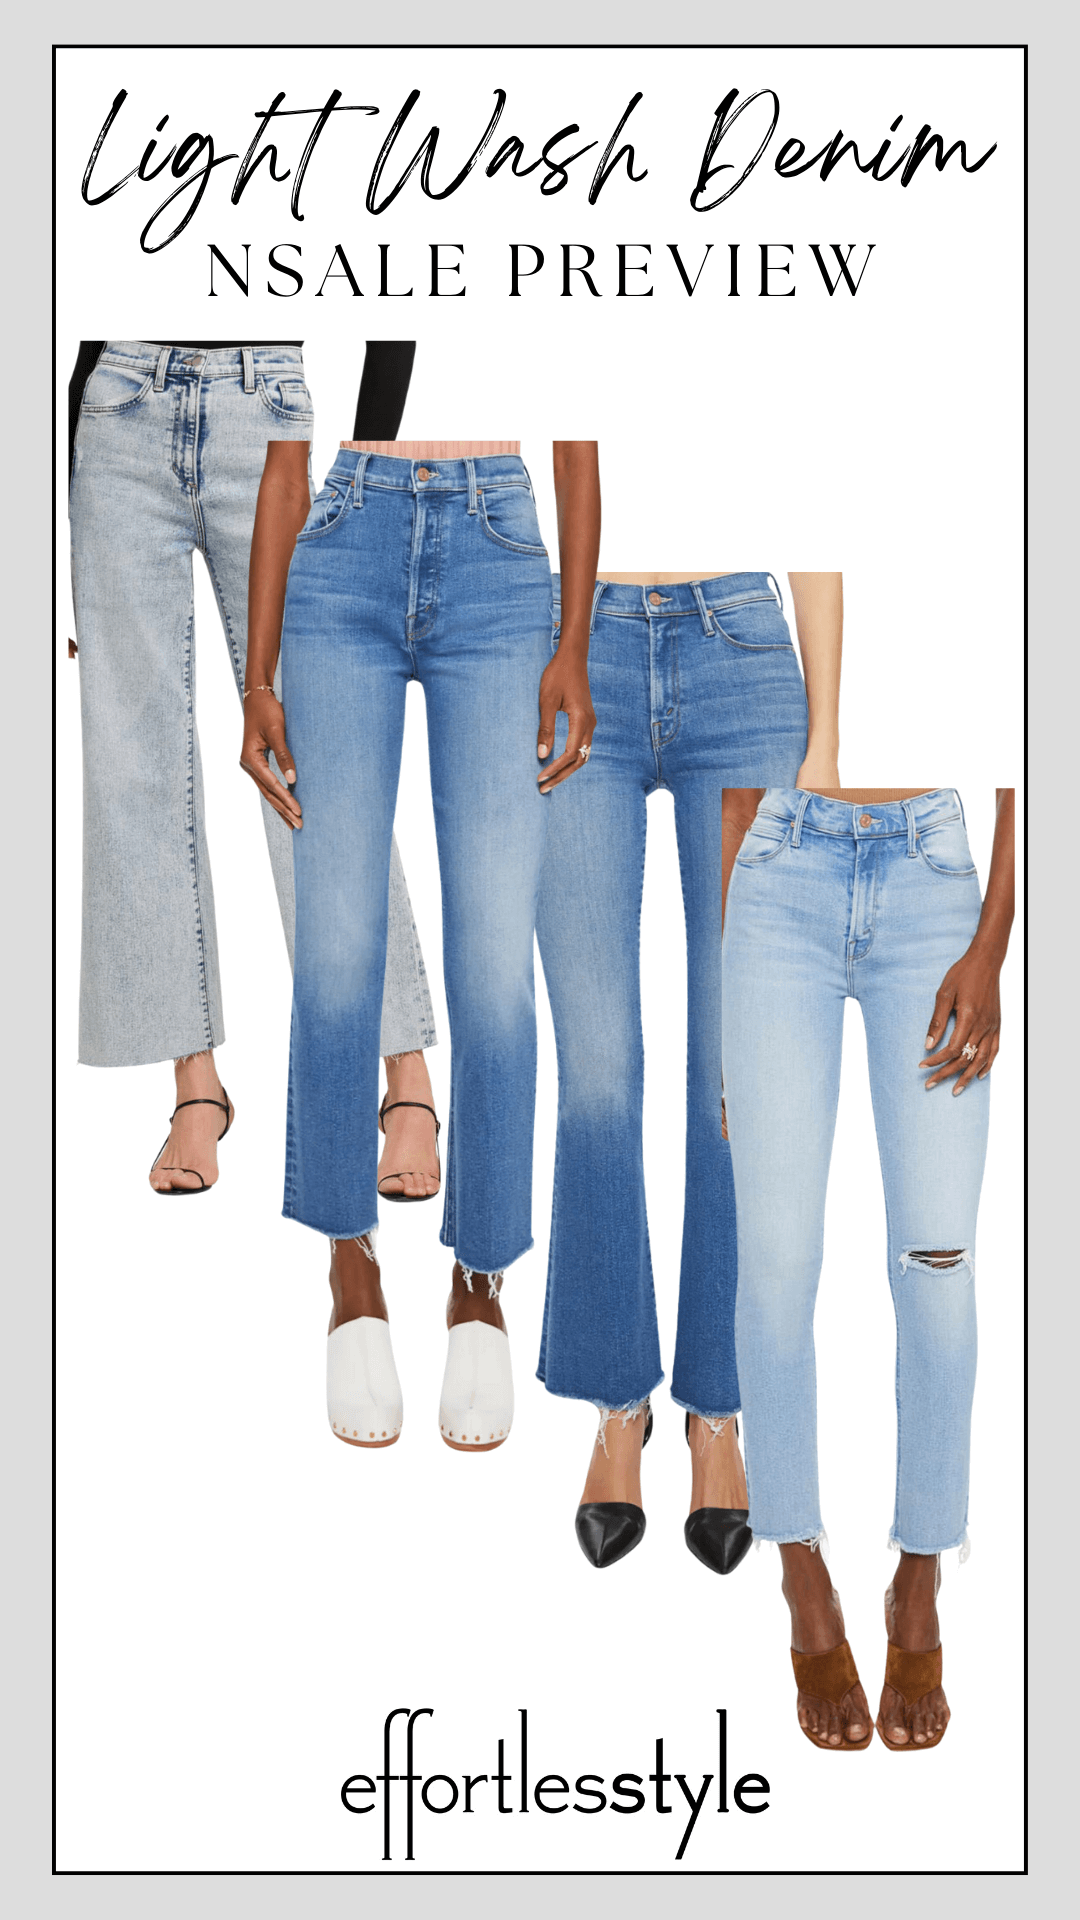 2023 NSale Preview - Denim Edition Light Wash Denim personal stylists share favorite light wash denim in NSale the best jeans in the Nordstrom Sale the best light wash jeans for fall personal stylists share the best denim in the Nordstrom Sale how to buy light wash jeans